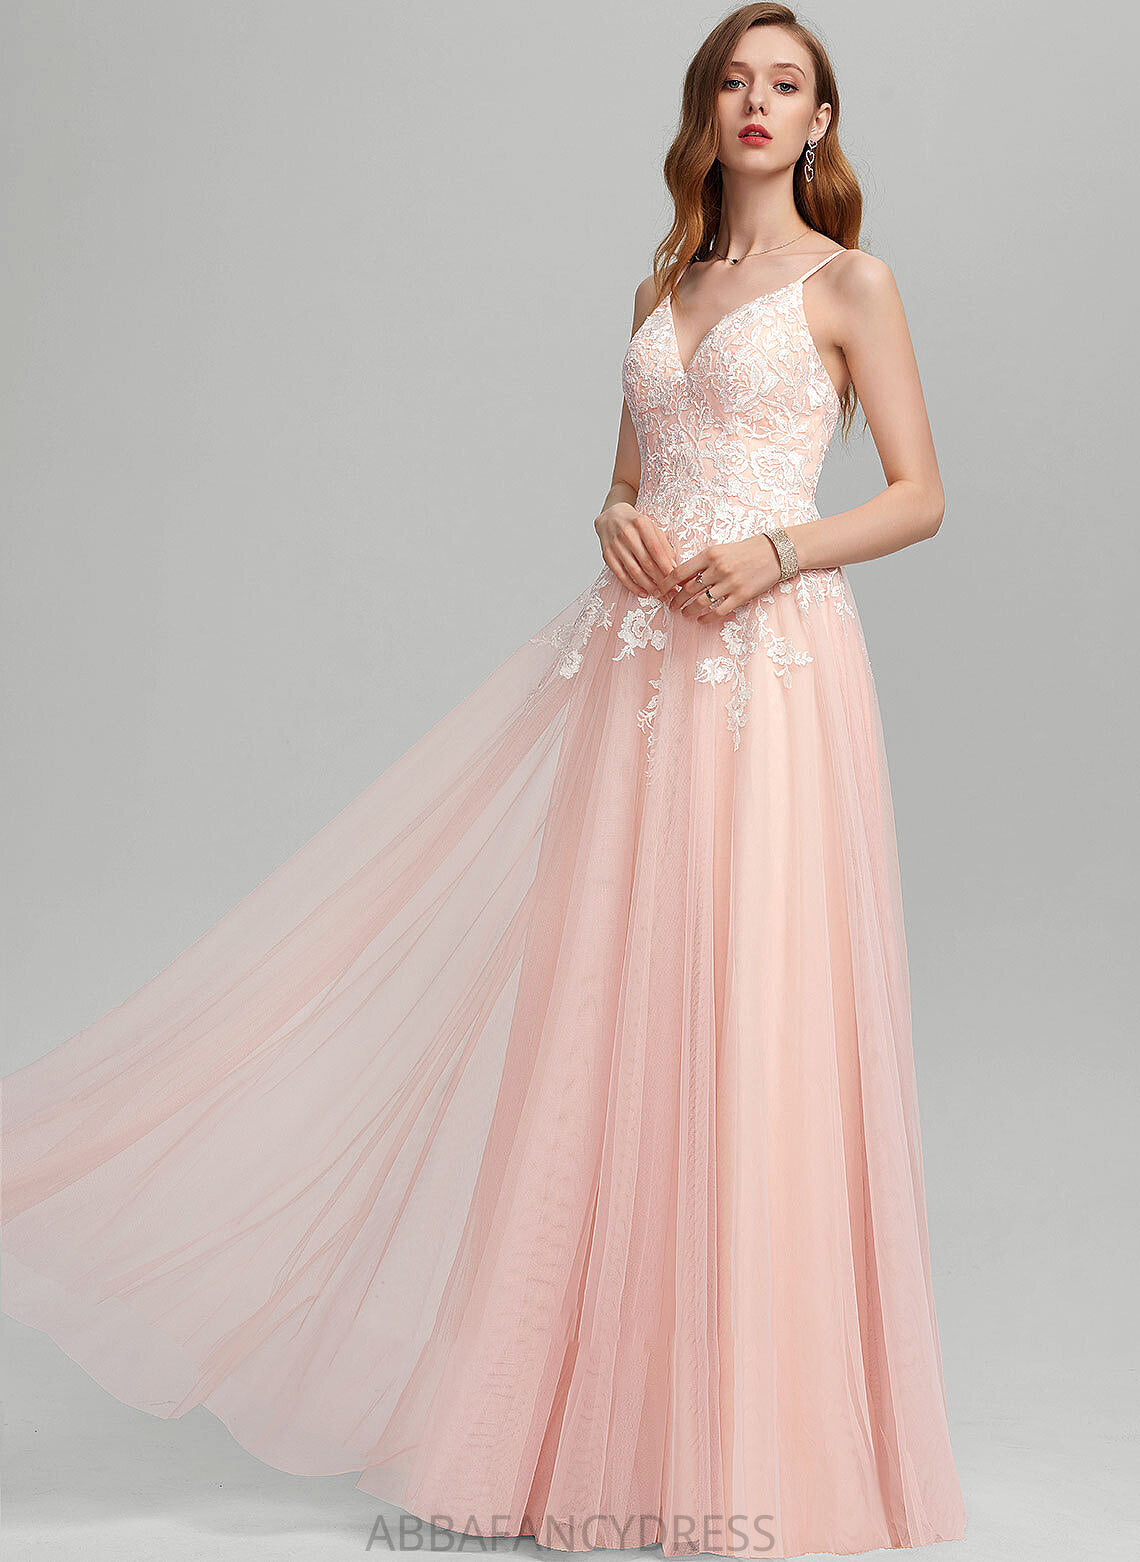 Wedding Sequins Dress Sweetheart Ball-Gown/Princess Tulle Floor-Length Clare Wedding Dresses With